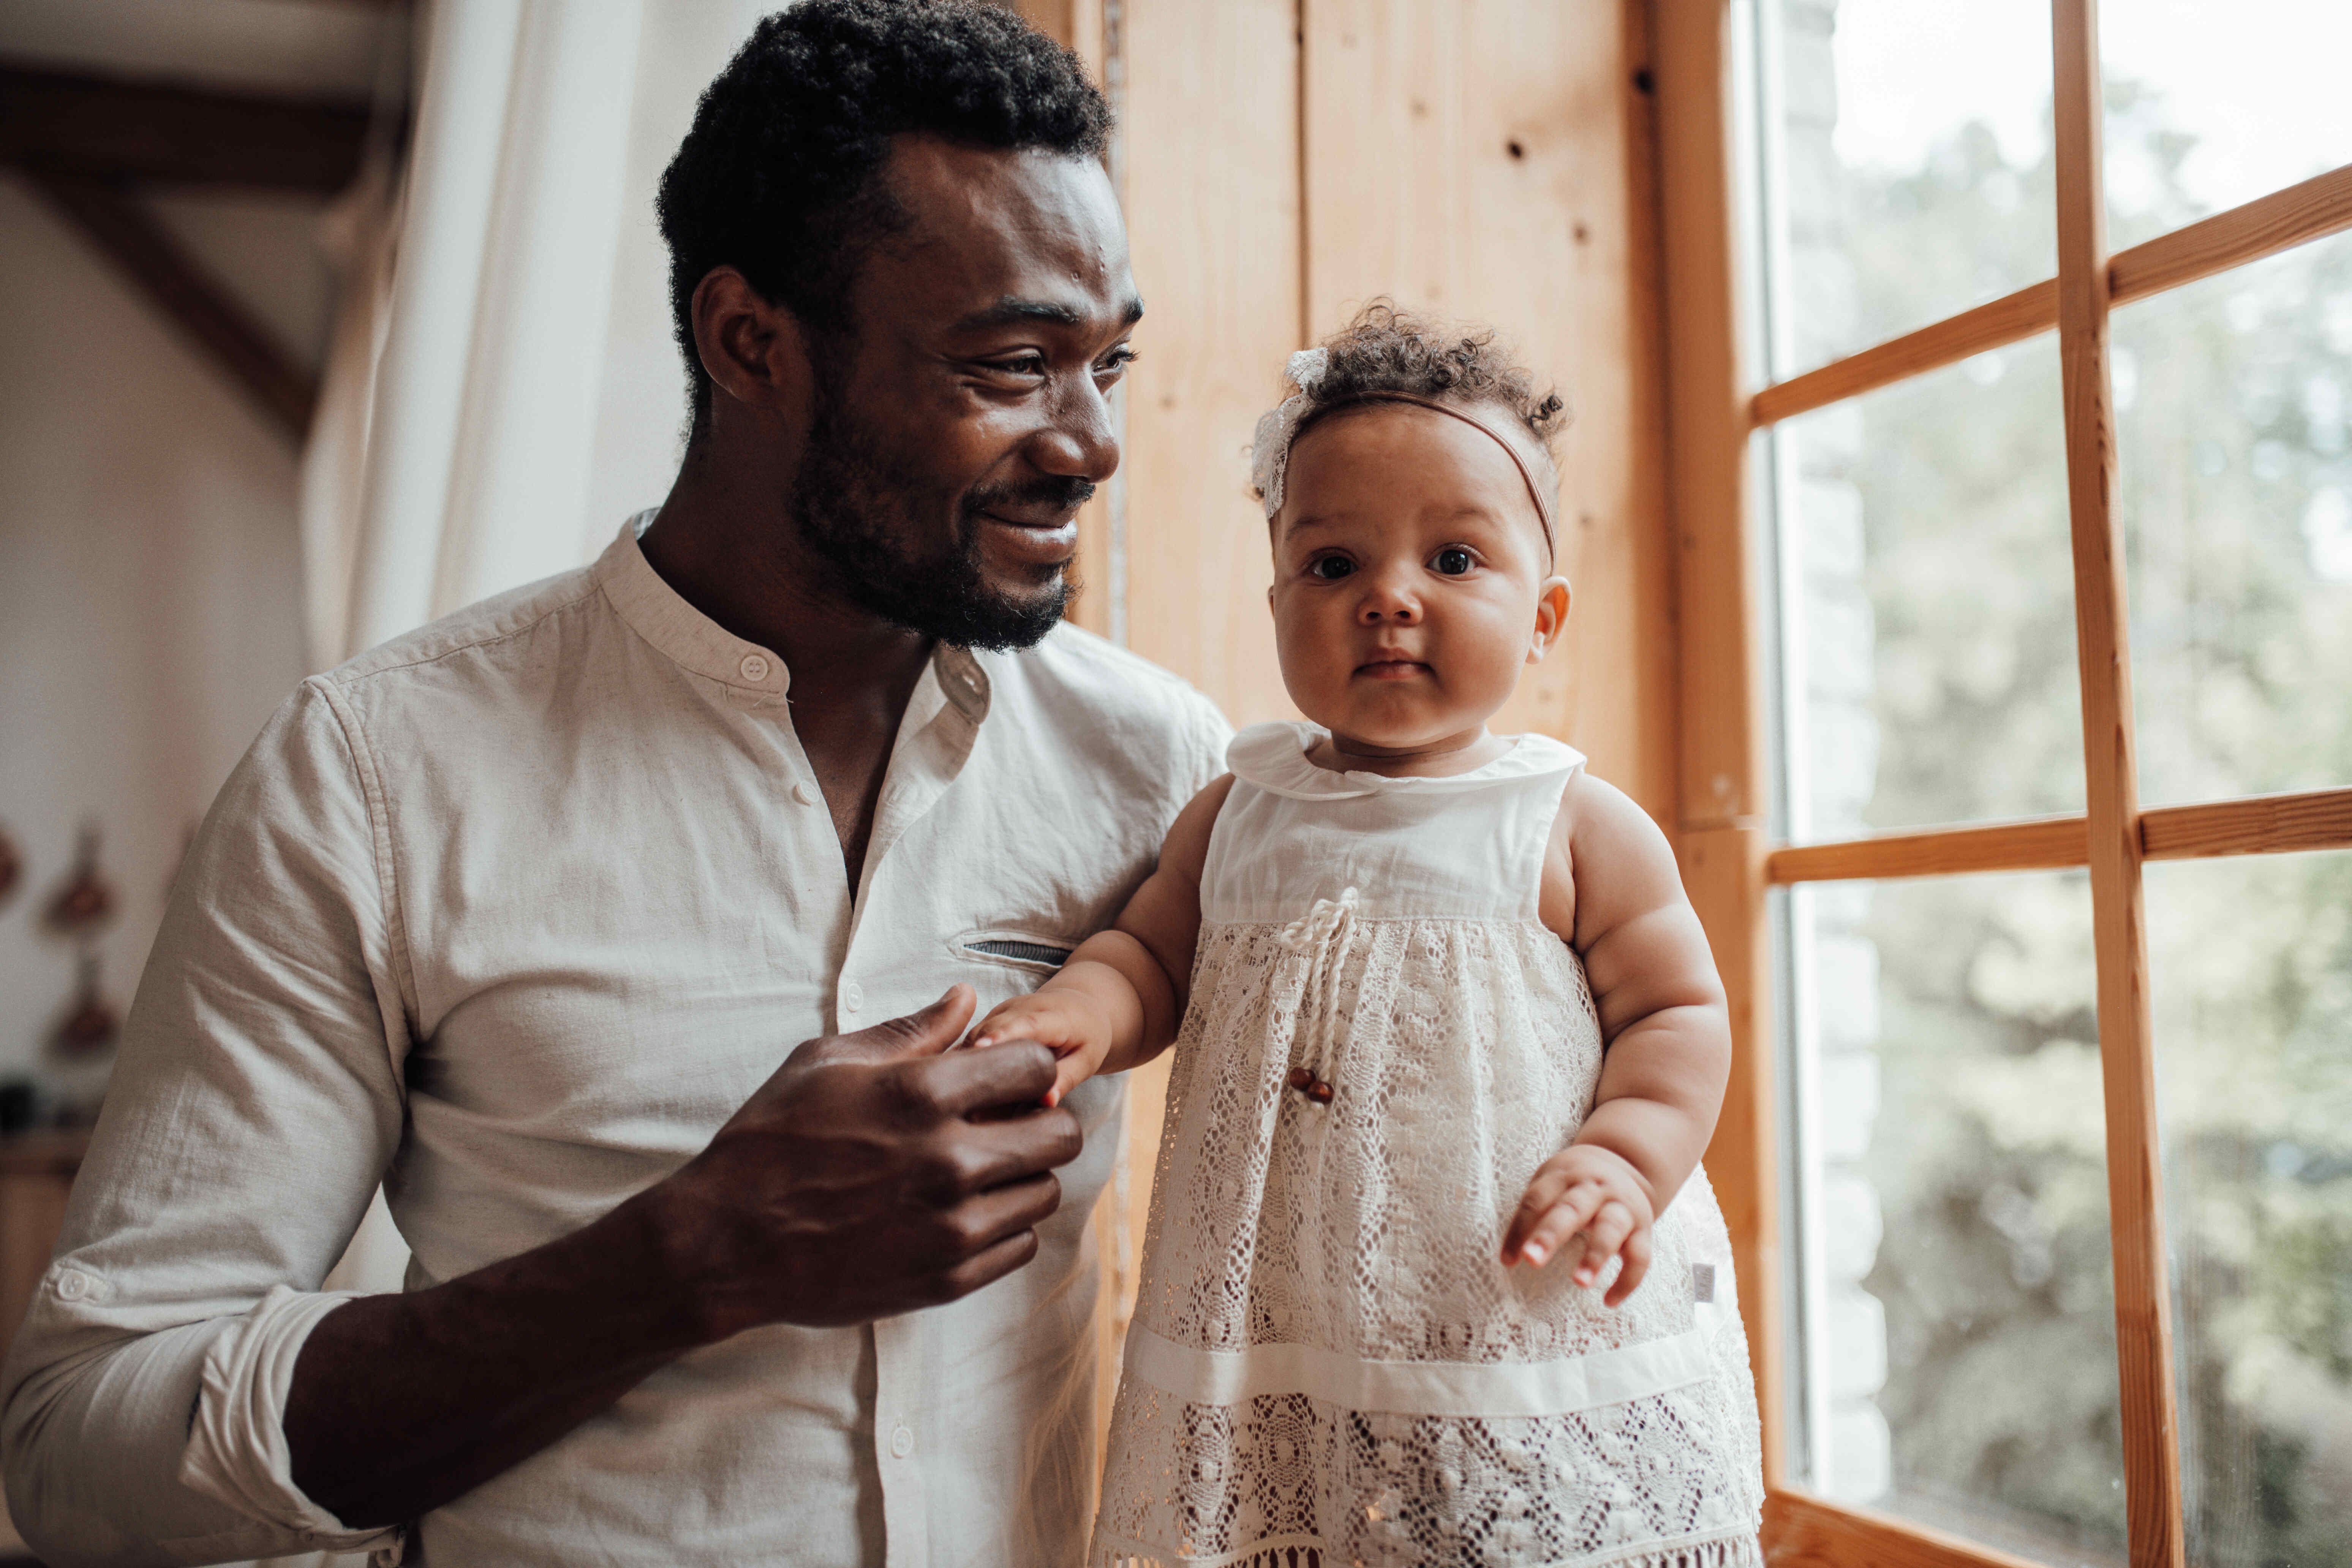 Photo smiling black man holding a daughter